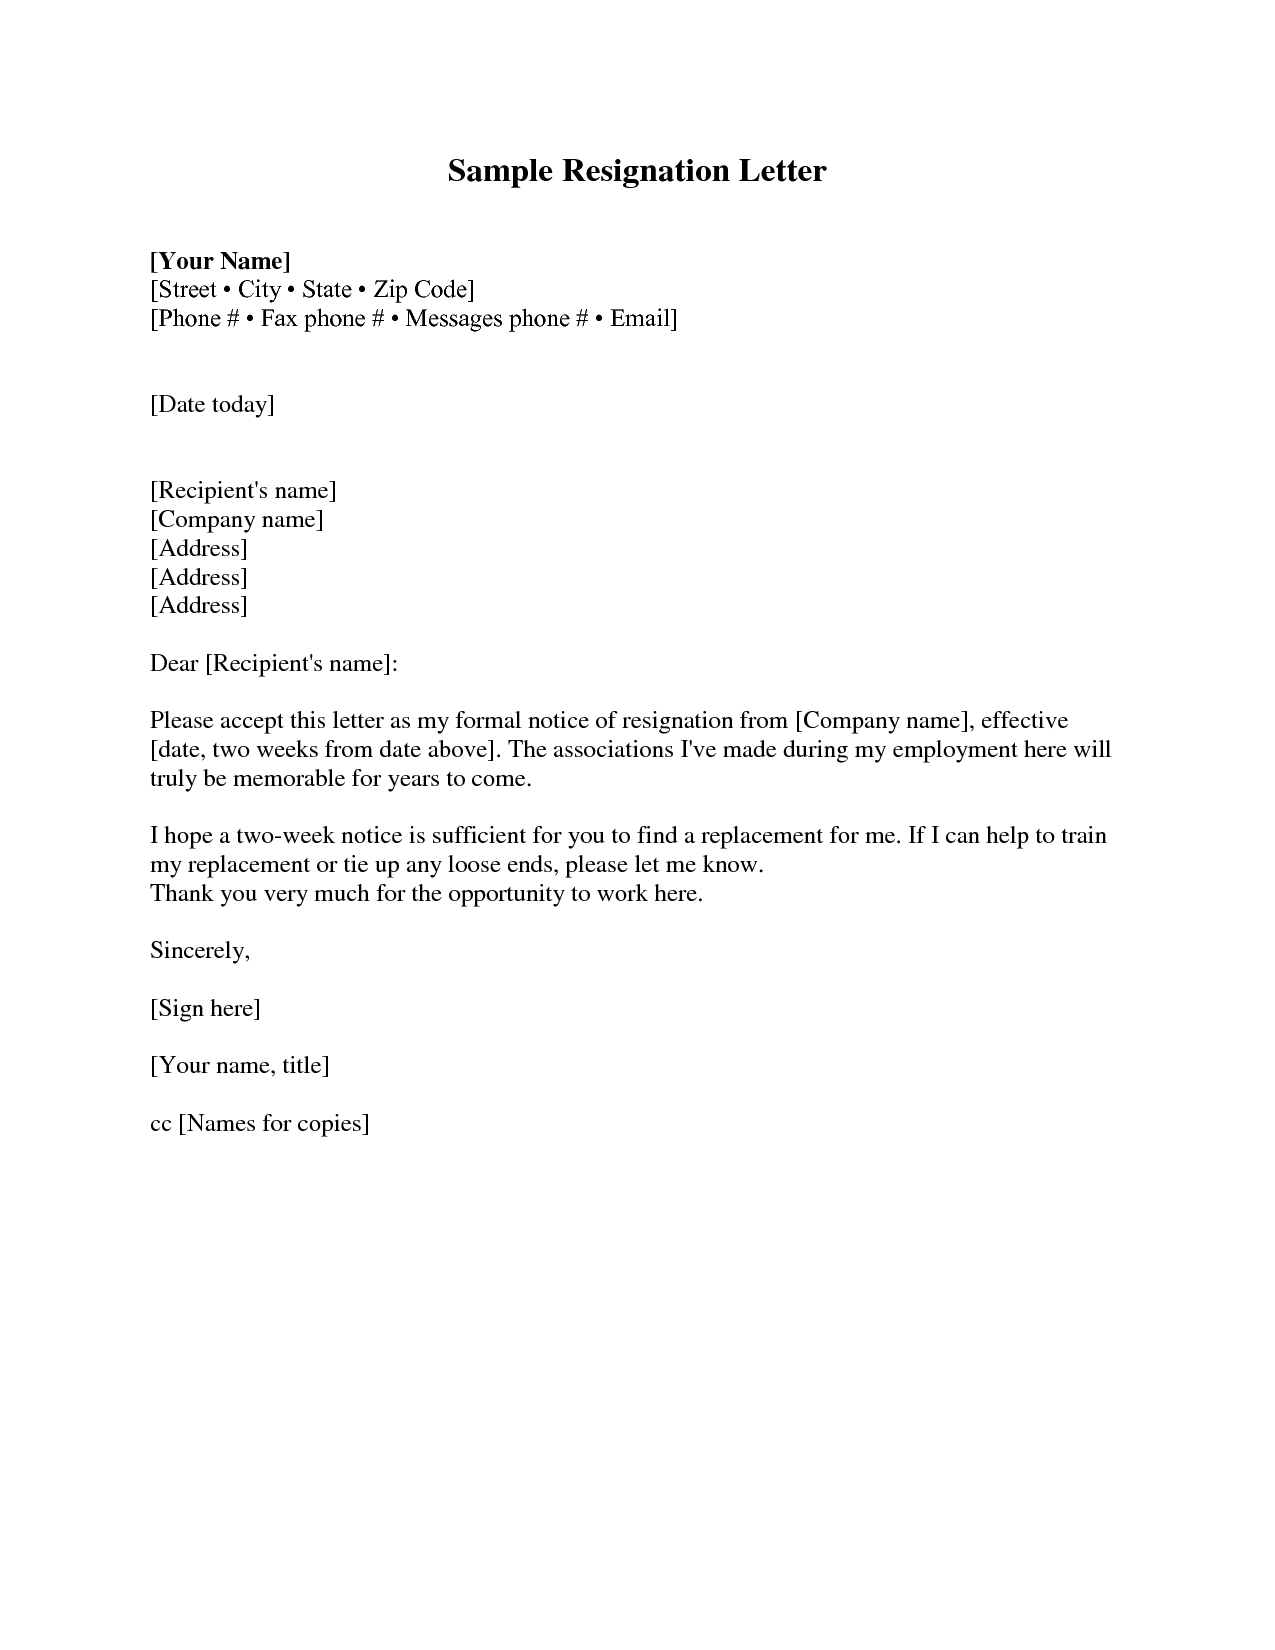 work resignation letter template example-resignation letter sample 2 weeks notice 3-p